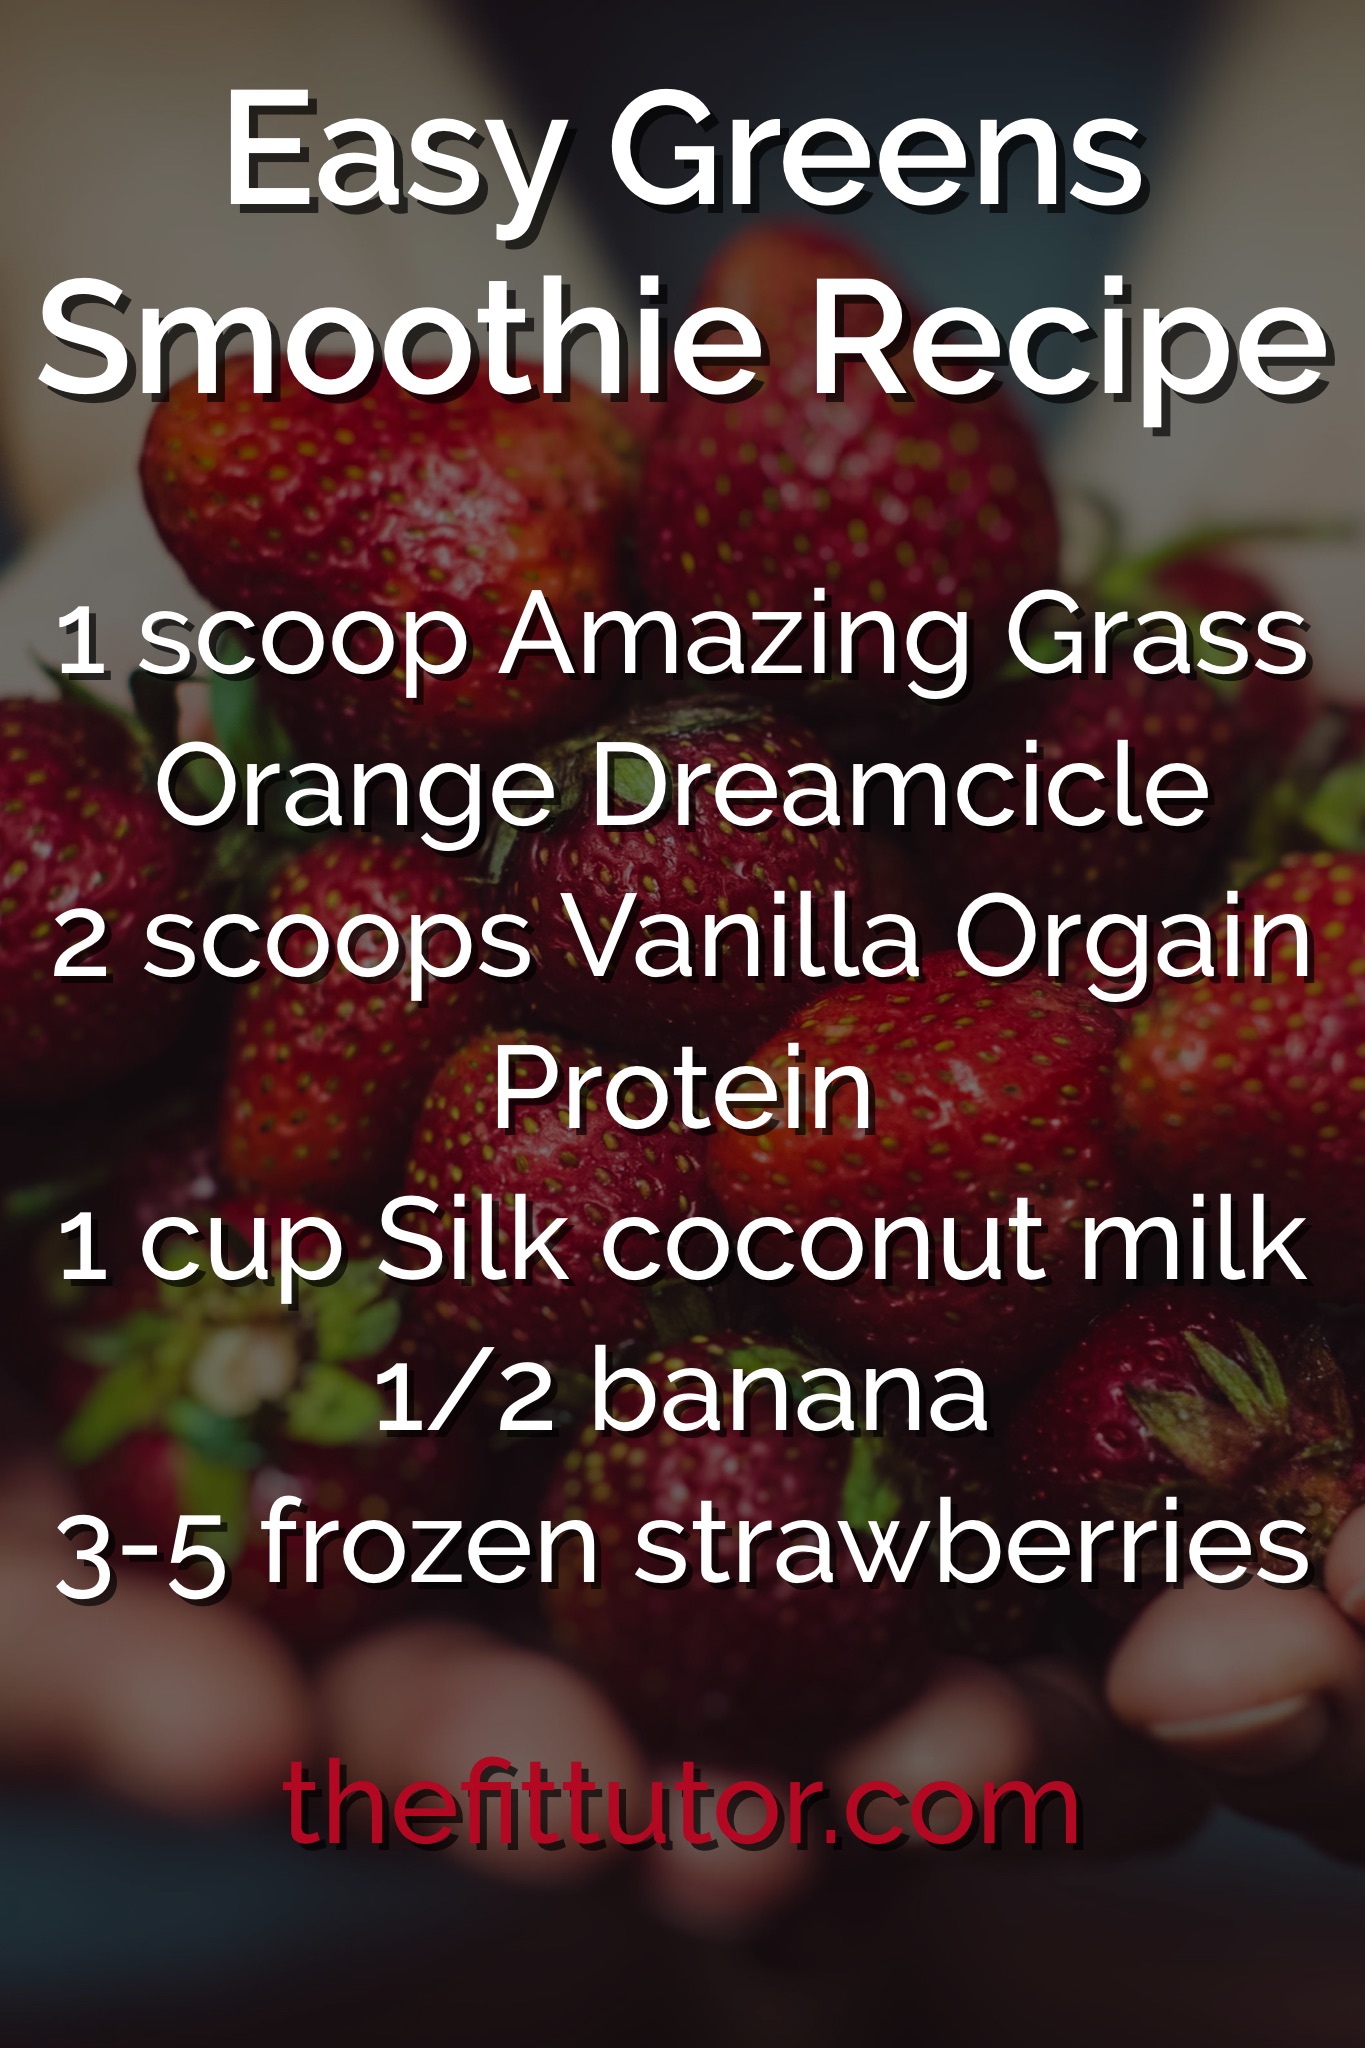 Splurging this holiday season? We replace our normal healthier foods for our cravings and once a year treats- have this smoothie daily to help ensure you get enough protein and greens/veggies while you're being naughty!